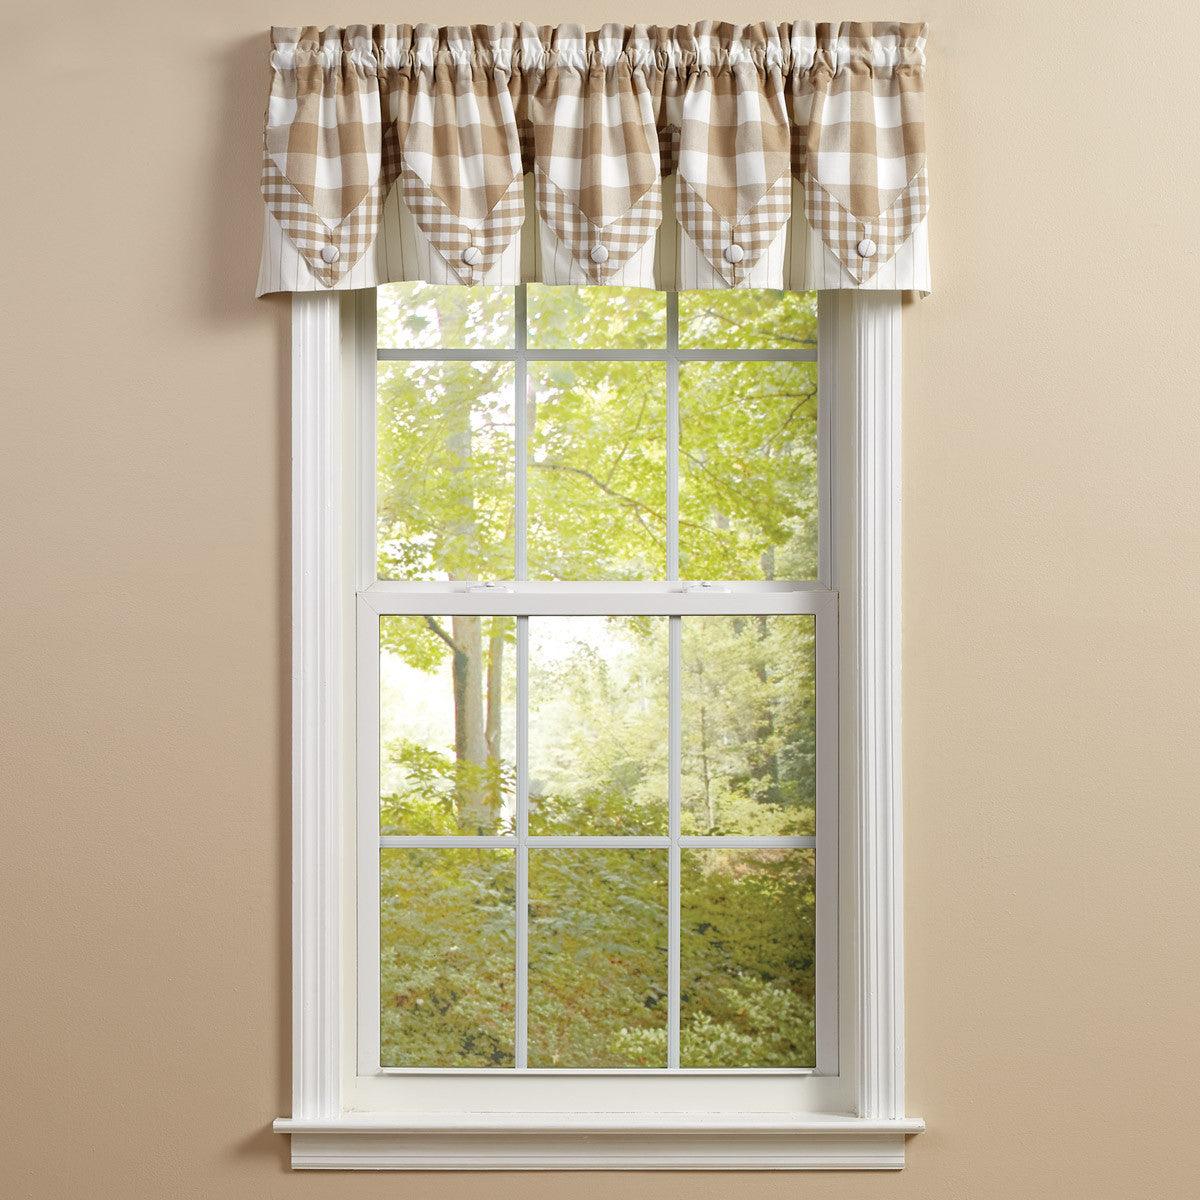 Wicklow Lined Point Valance 15" L - Natural - Park designs - The Fox Decor